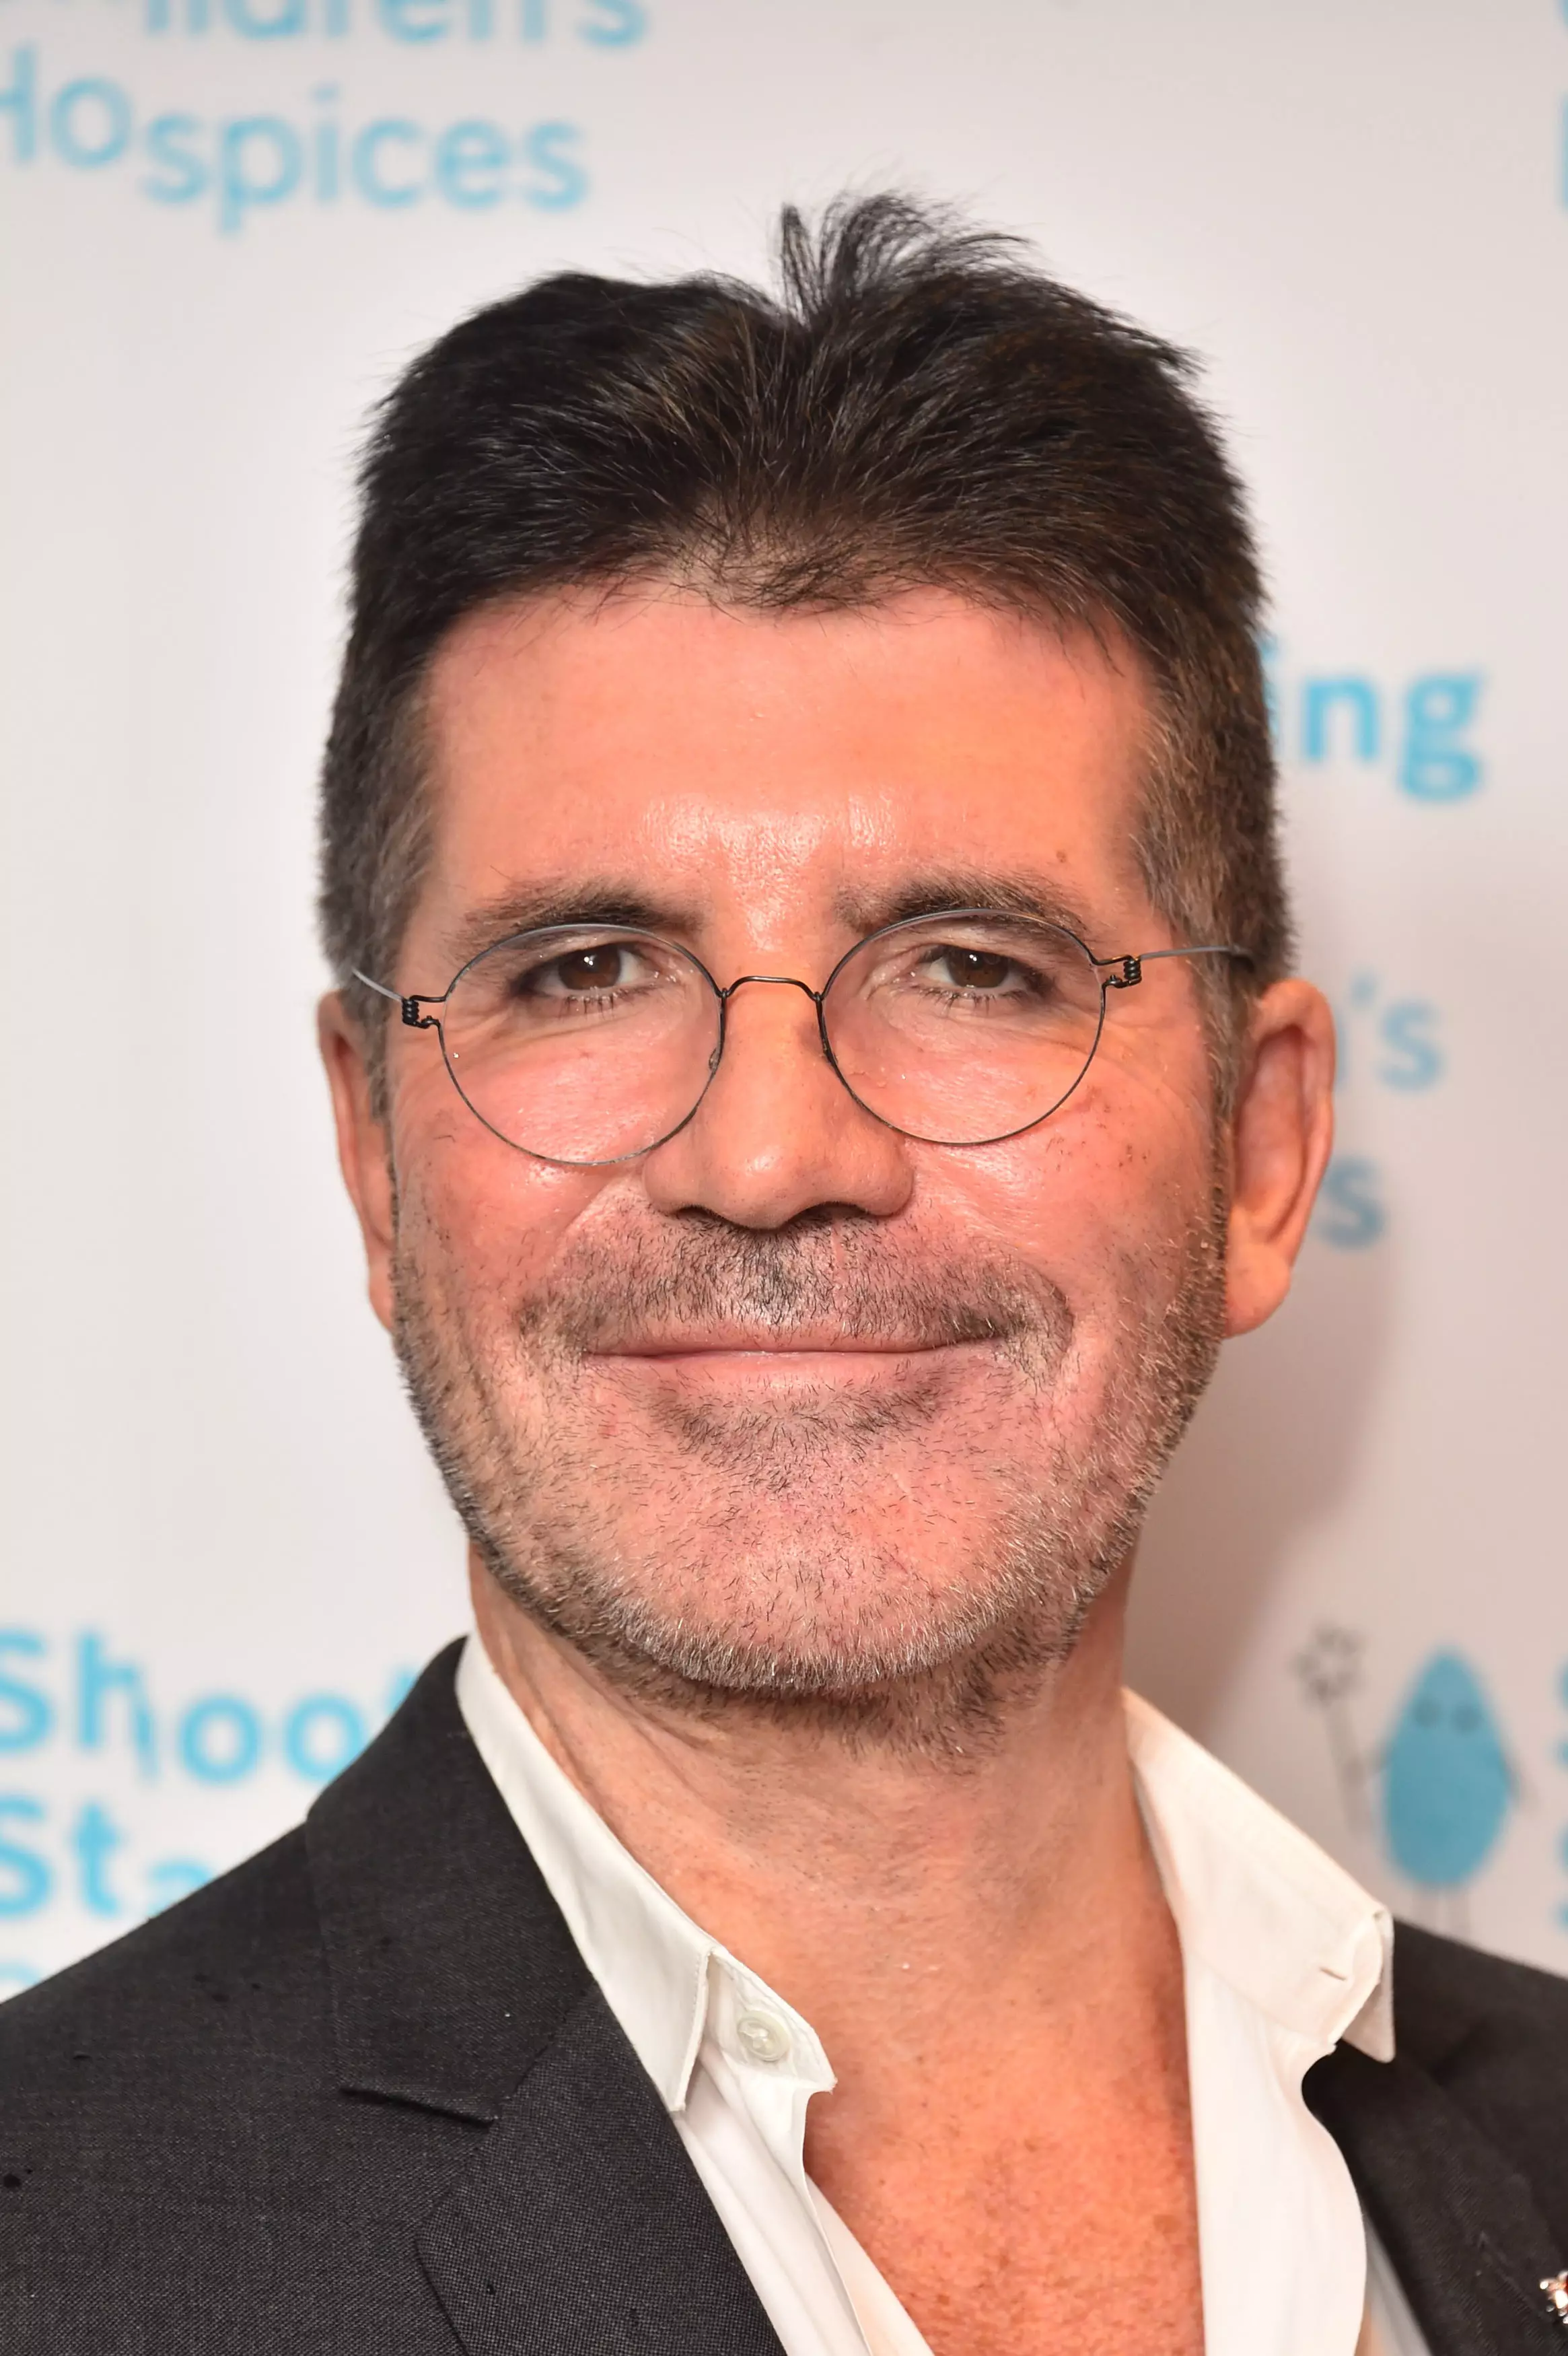 Simon Cowell urged stars not to use taxpayers money.